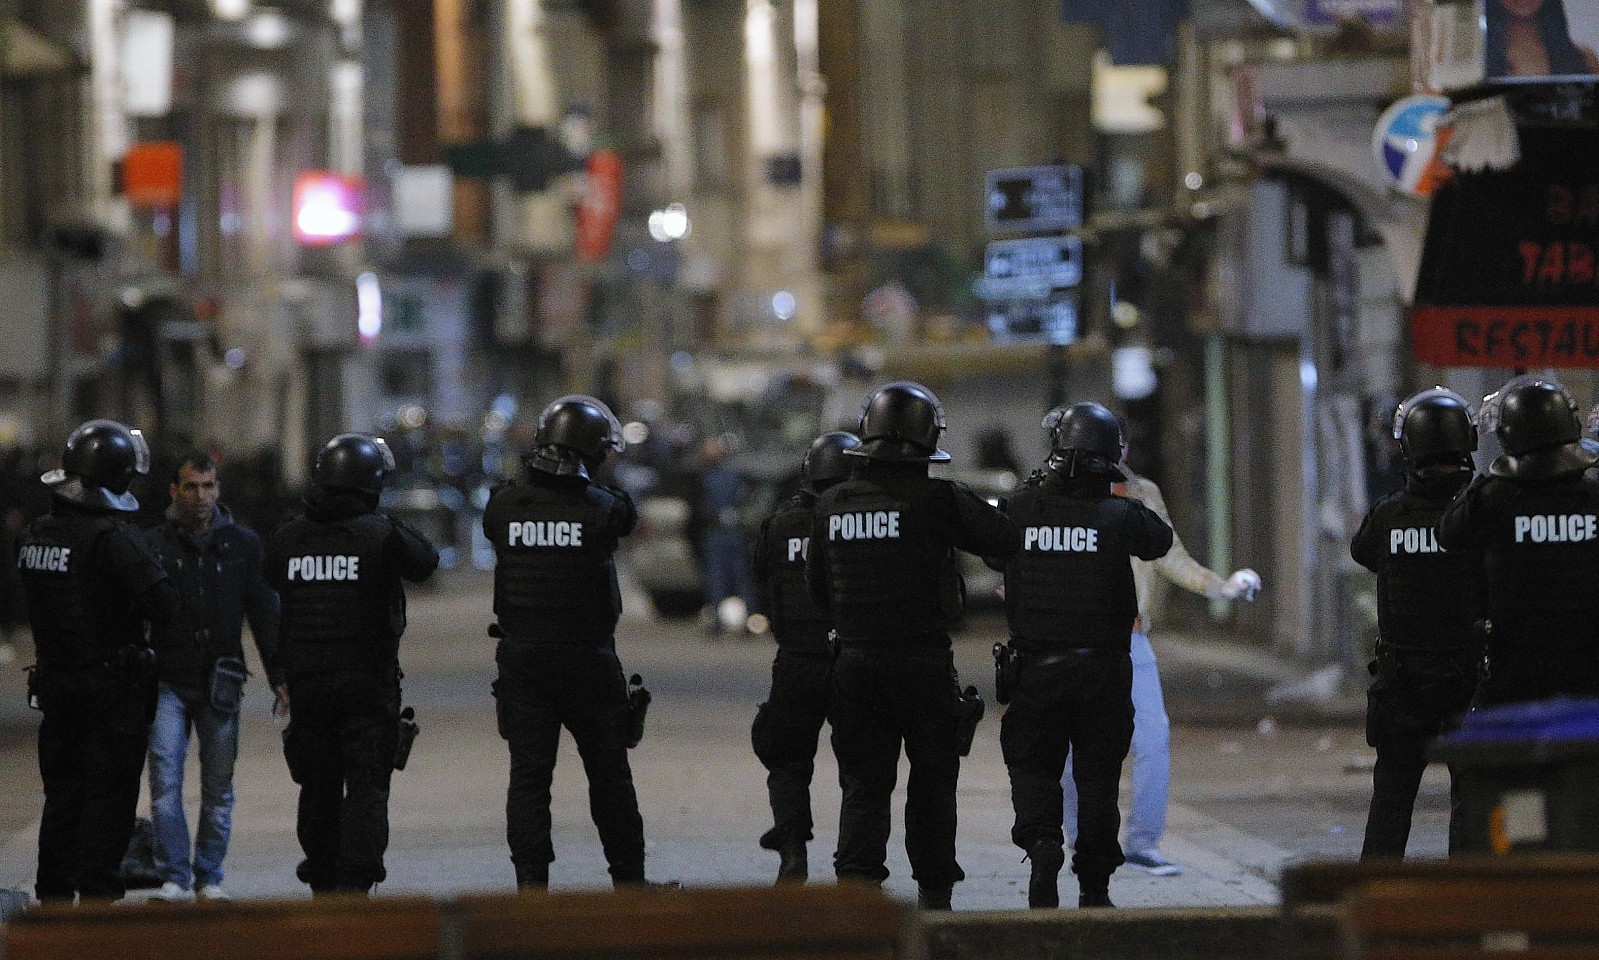 Police forces in St. Denis